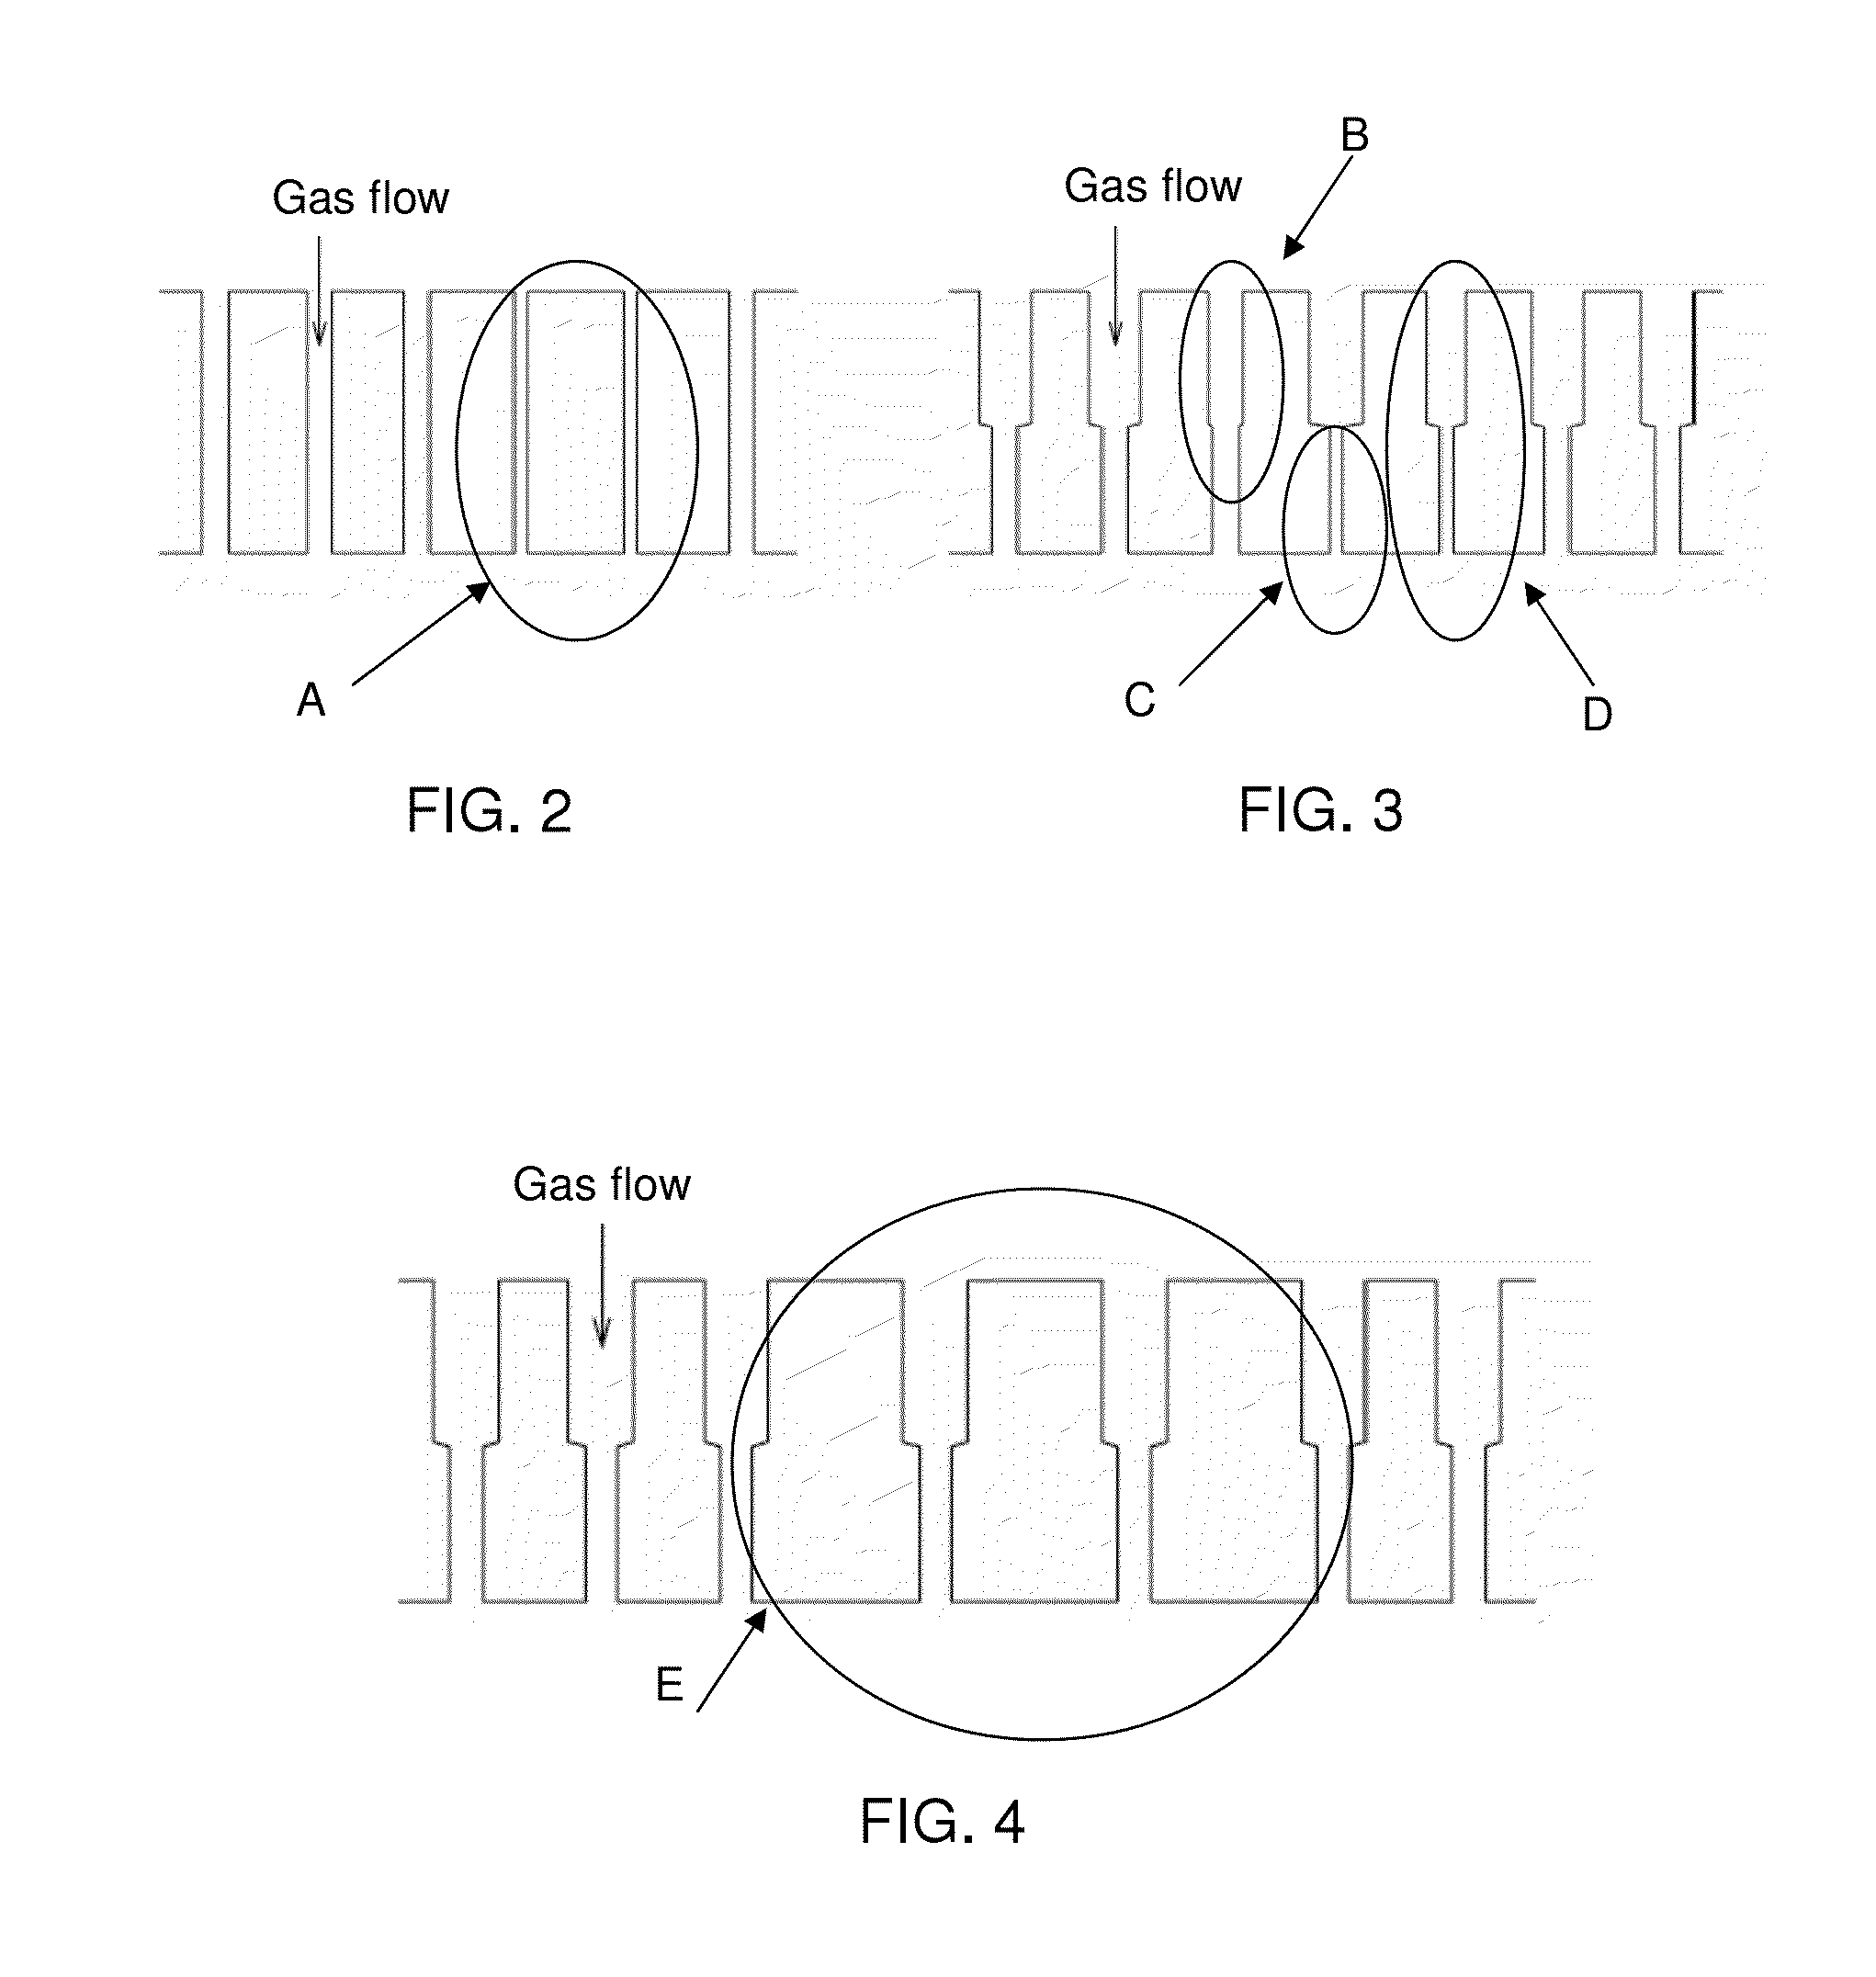 Shower plate having different aperture dimensions and/or distributions